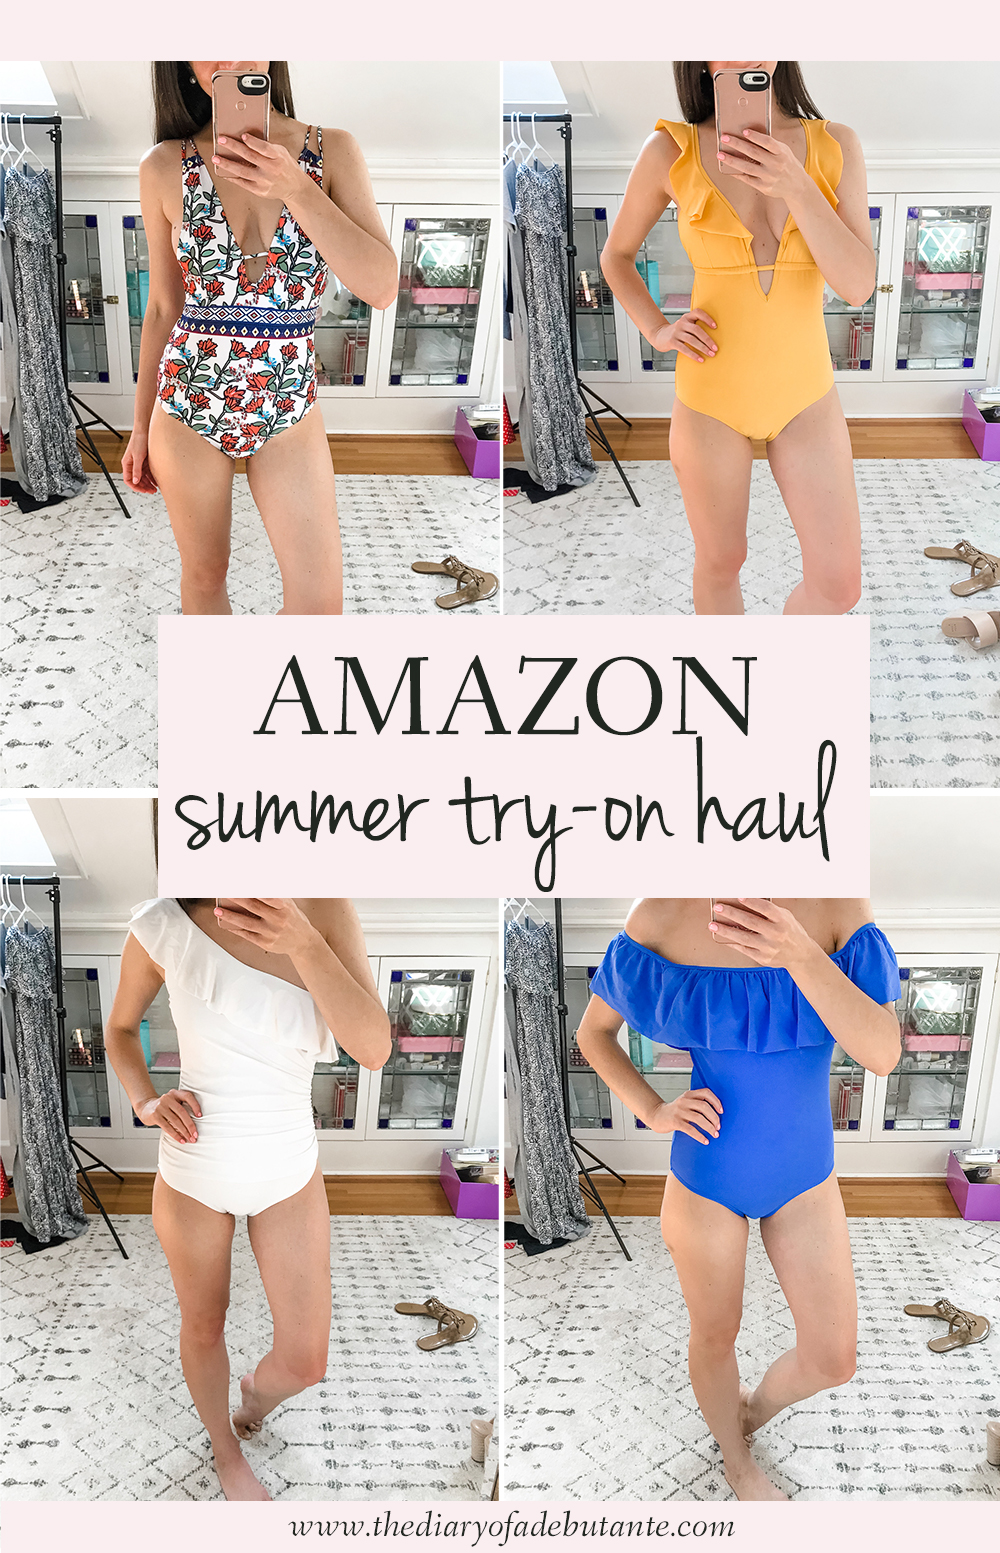 Amazon Summer Try-On Haul and Style Picks by popular affordable fashion blogger Stephanie Ziajka from Diary of a Debutante